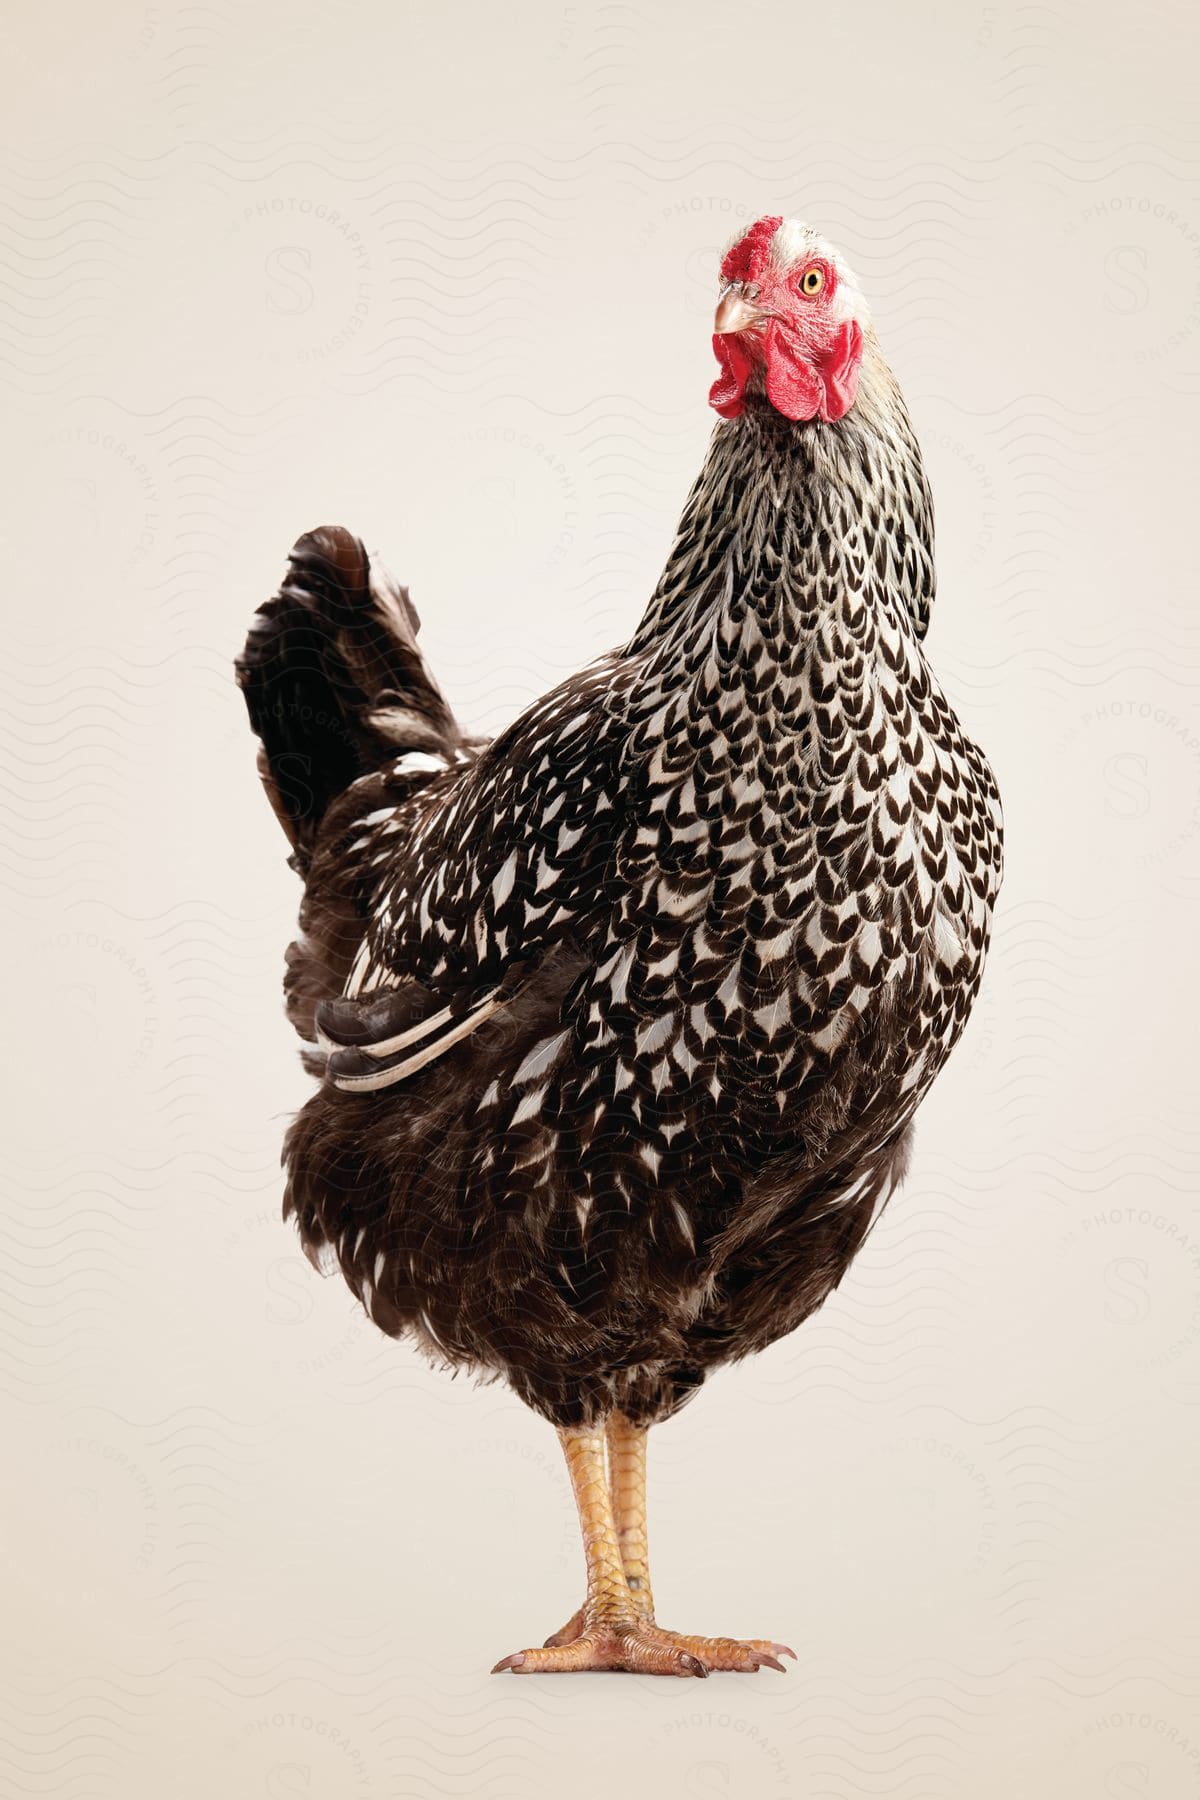 A chicken with white and brown feathers